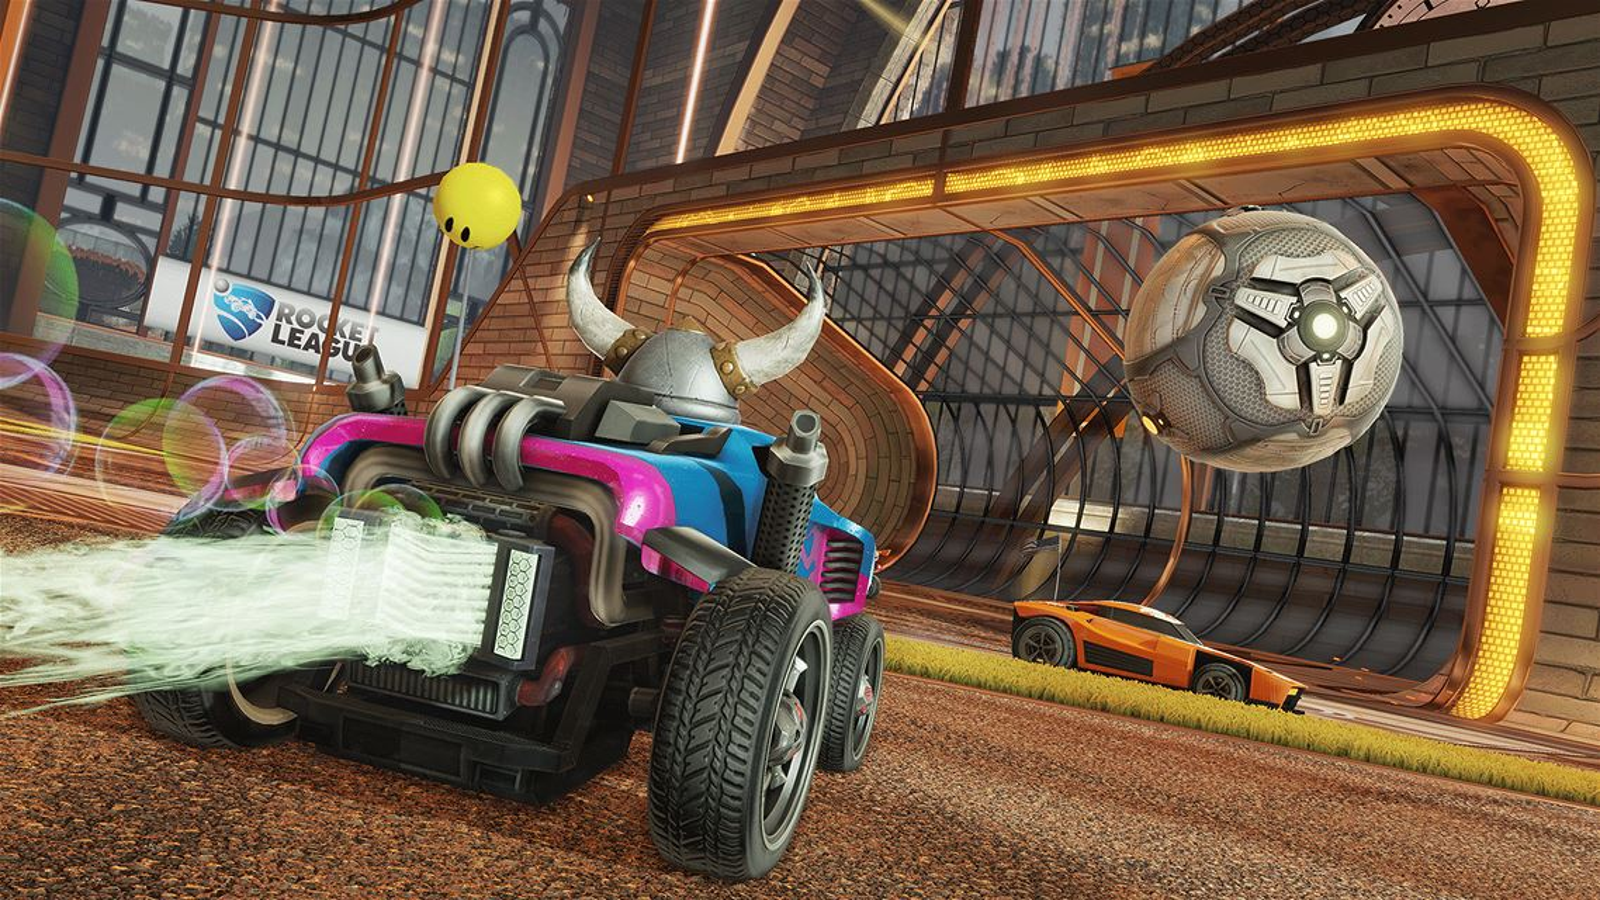 Epic Clarifies: Announced Plans to Stop Selling Rocket League on Steam | VG247